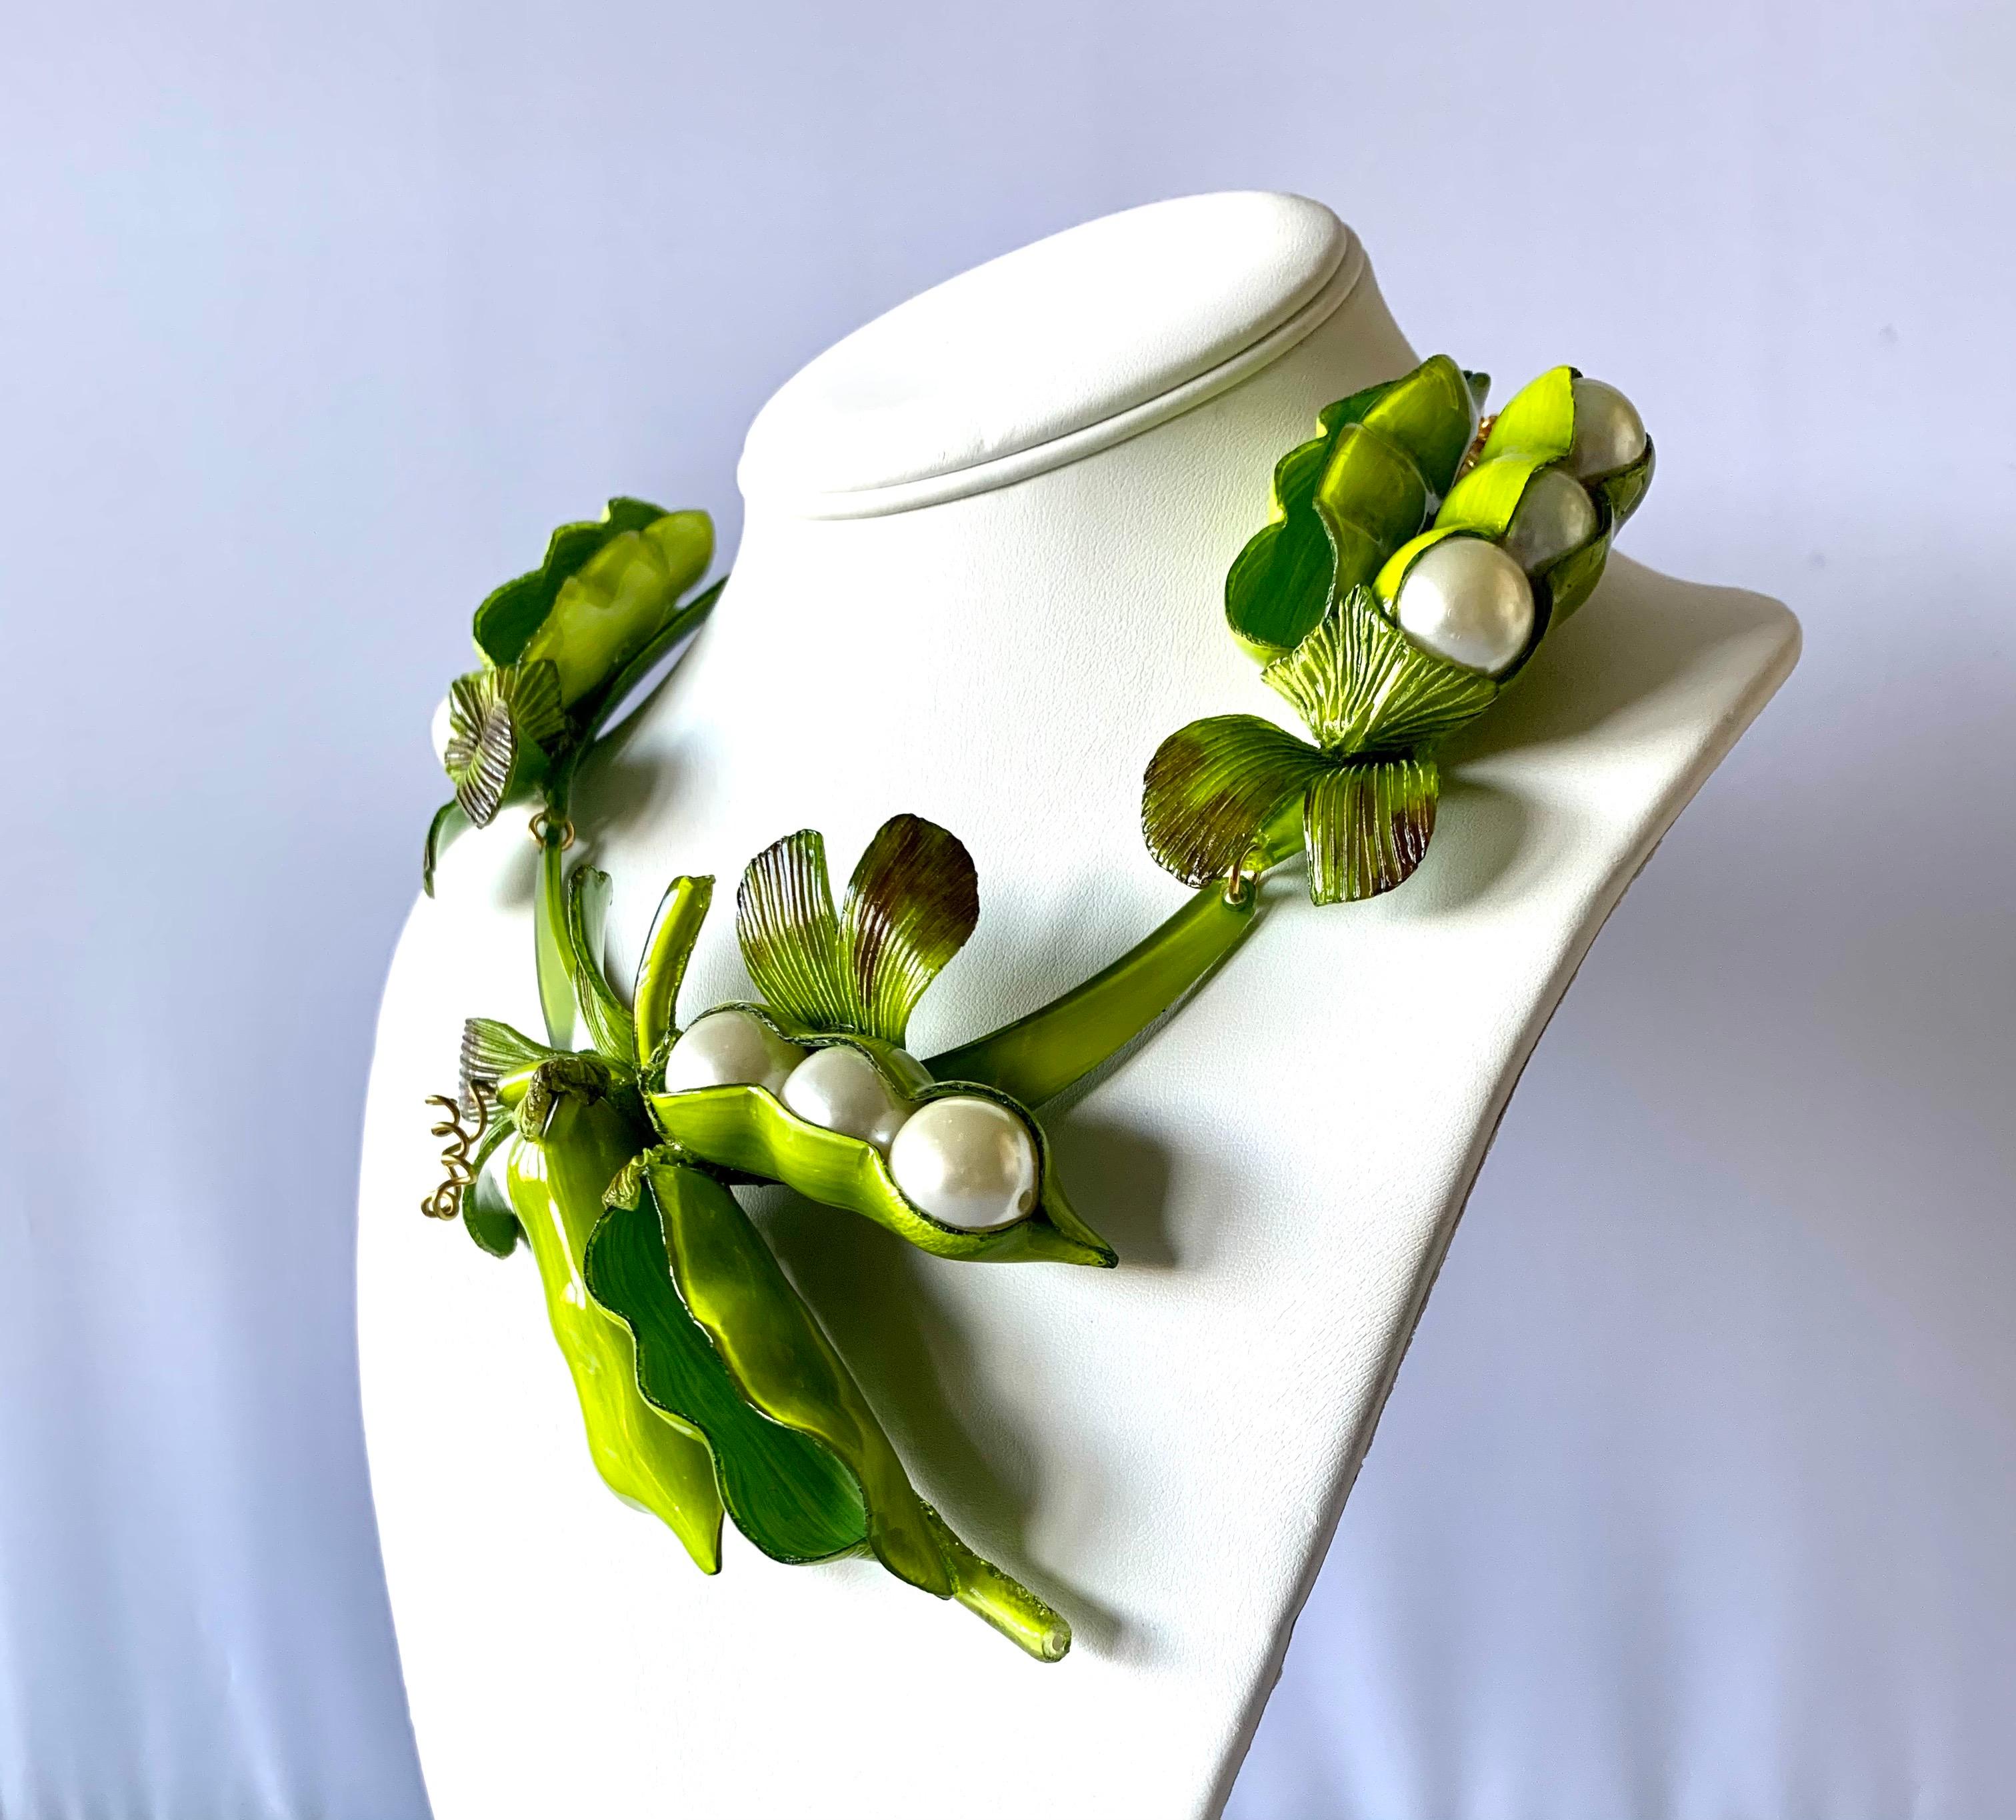 Contemporary designer giant peapod statement necklace - the bold necklace is comprised out of a row of highly adorned enameline (resin and enamel) peapods. The oversized peapods feature hand-manipulated and etched acrylic details and large white